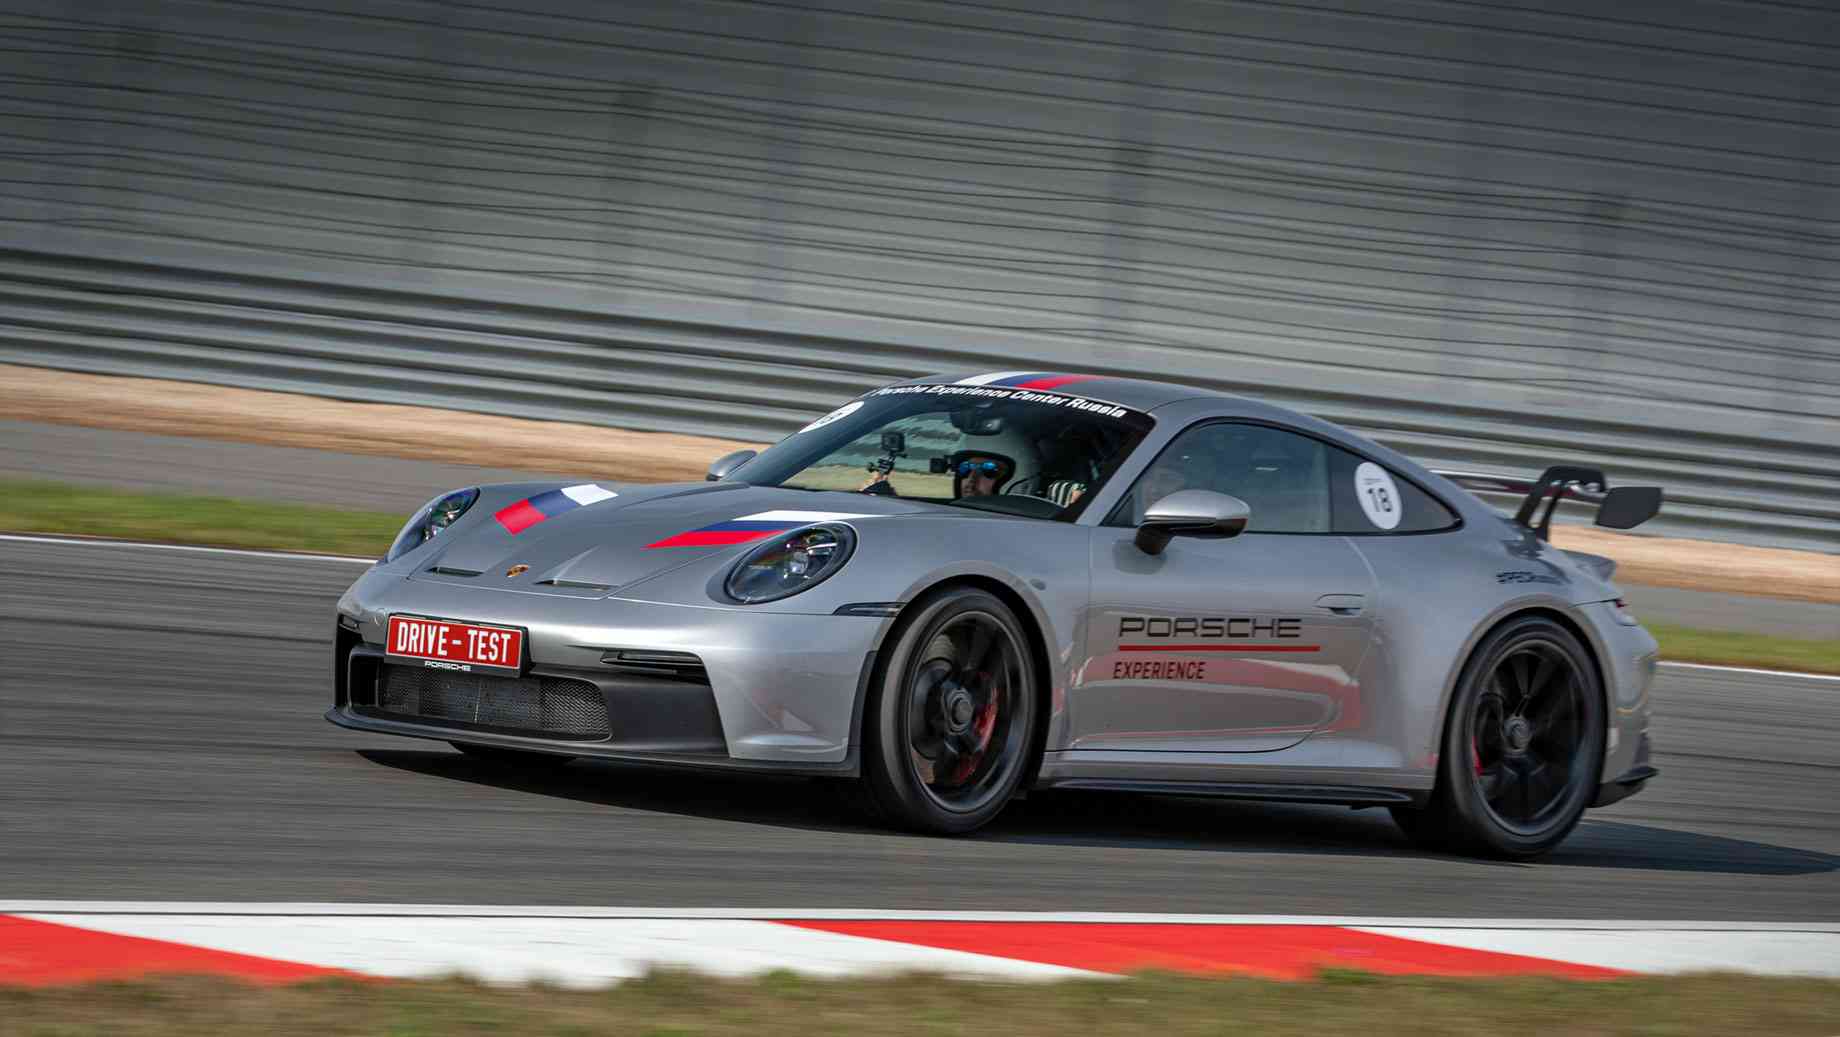 Breaking away on the Porsche GT3 992 Series from the Cayman GT4 c PDK